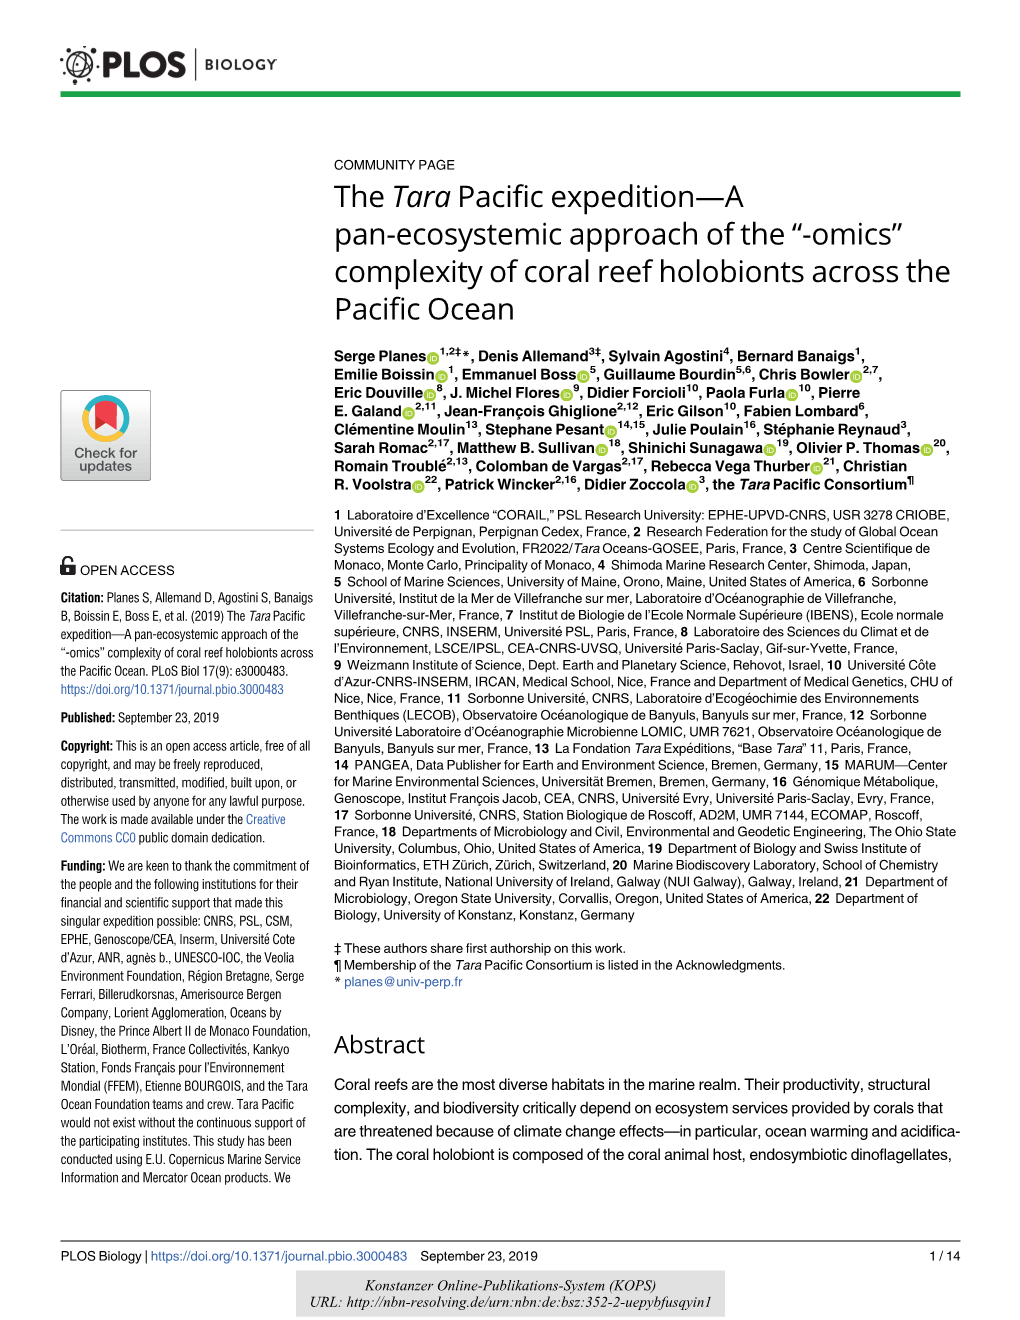 “-Omics” Complexity of Coral Reef Holobionts Across the Pacific Ocean